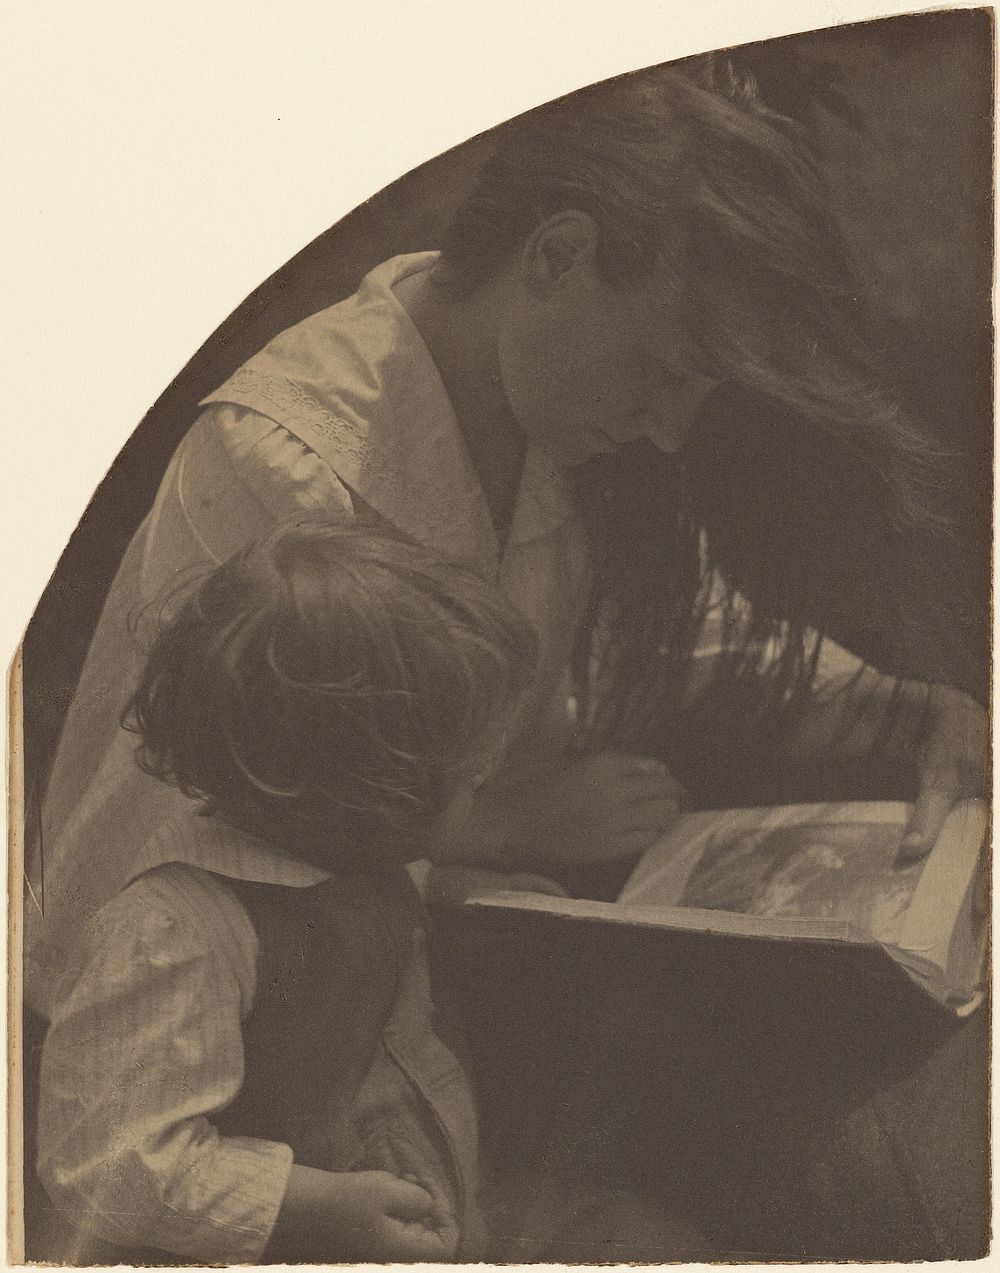 Gertrude and Charles O'Malley: A Triptych by Gertrude Käsebier